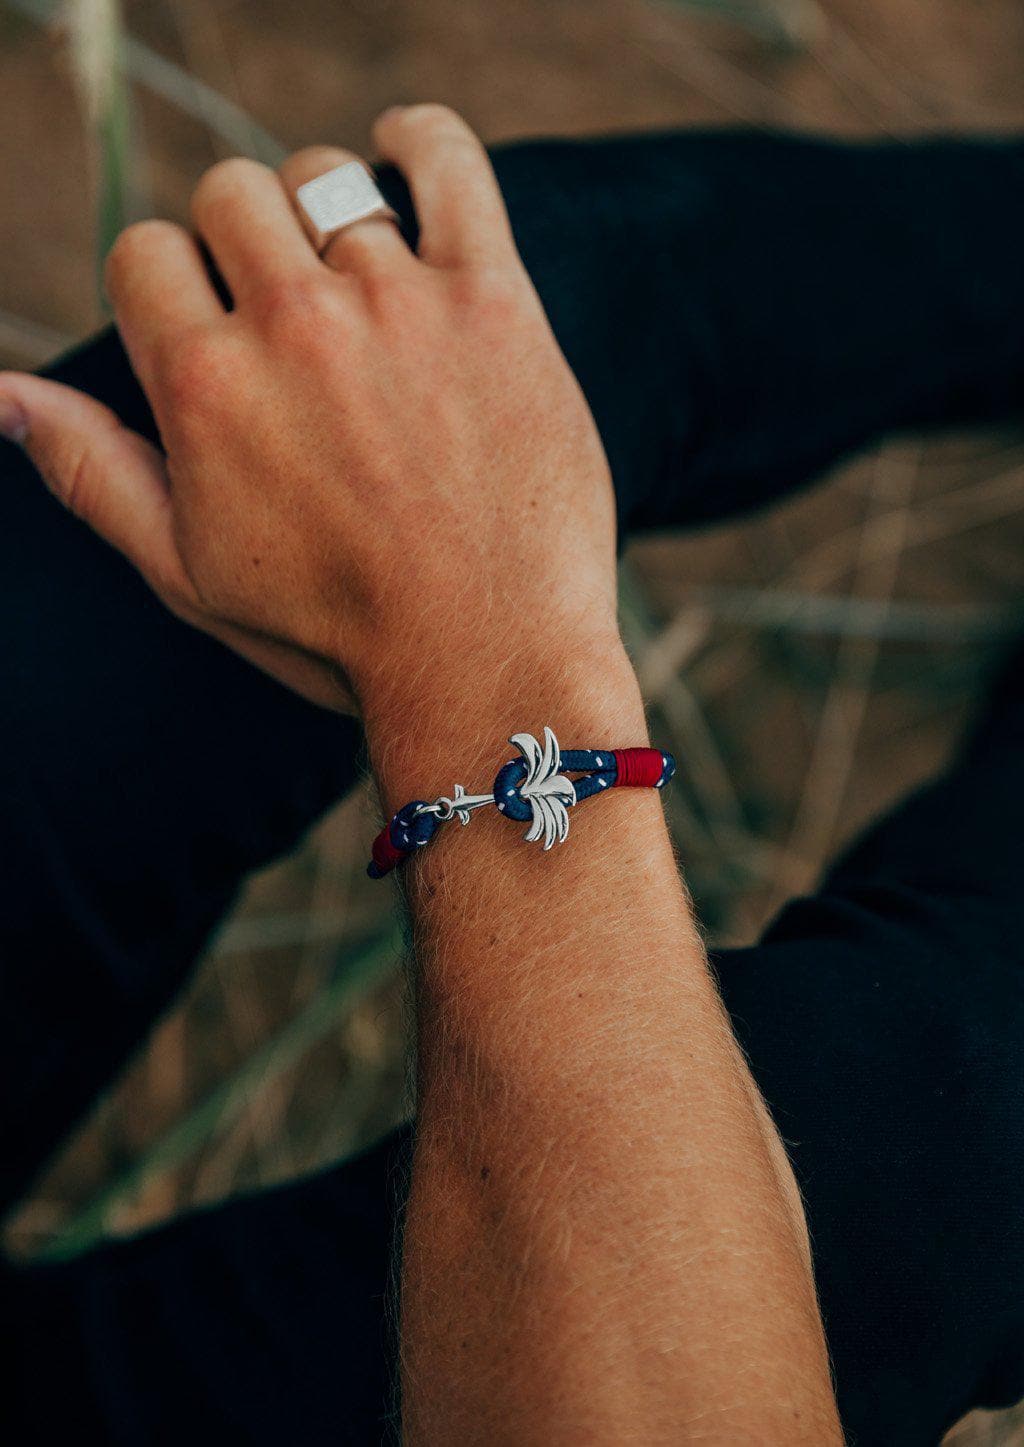 Voyager - Single - Season two Palm anchor bracelet with blue and red nylon band. Tanned arm.